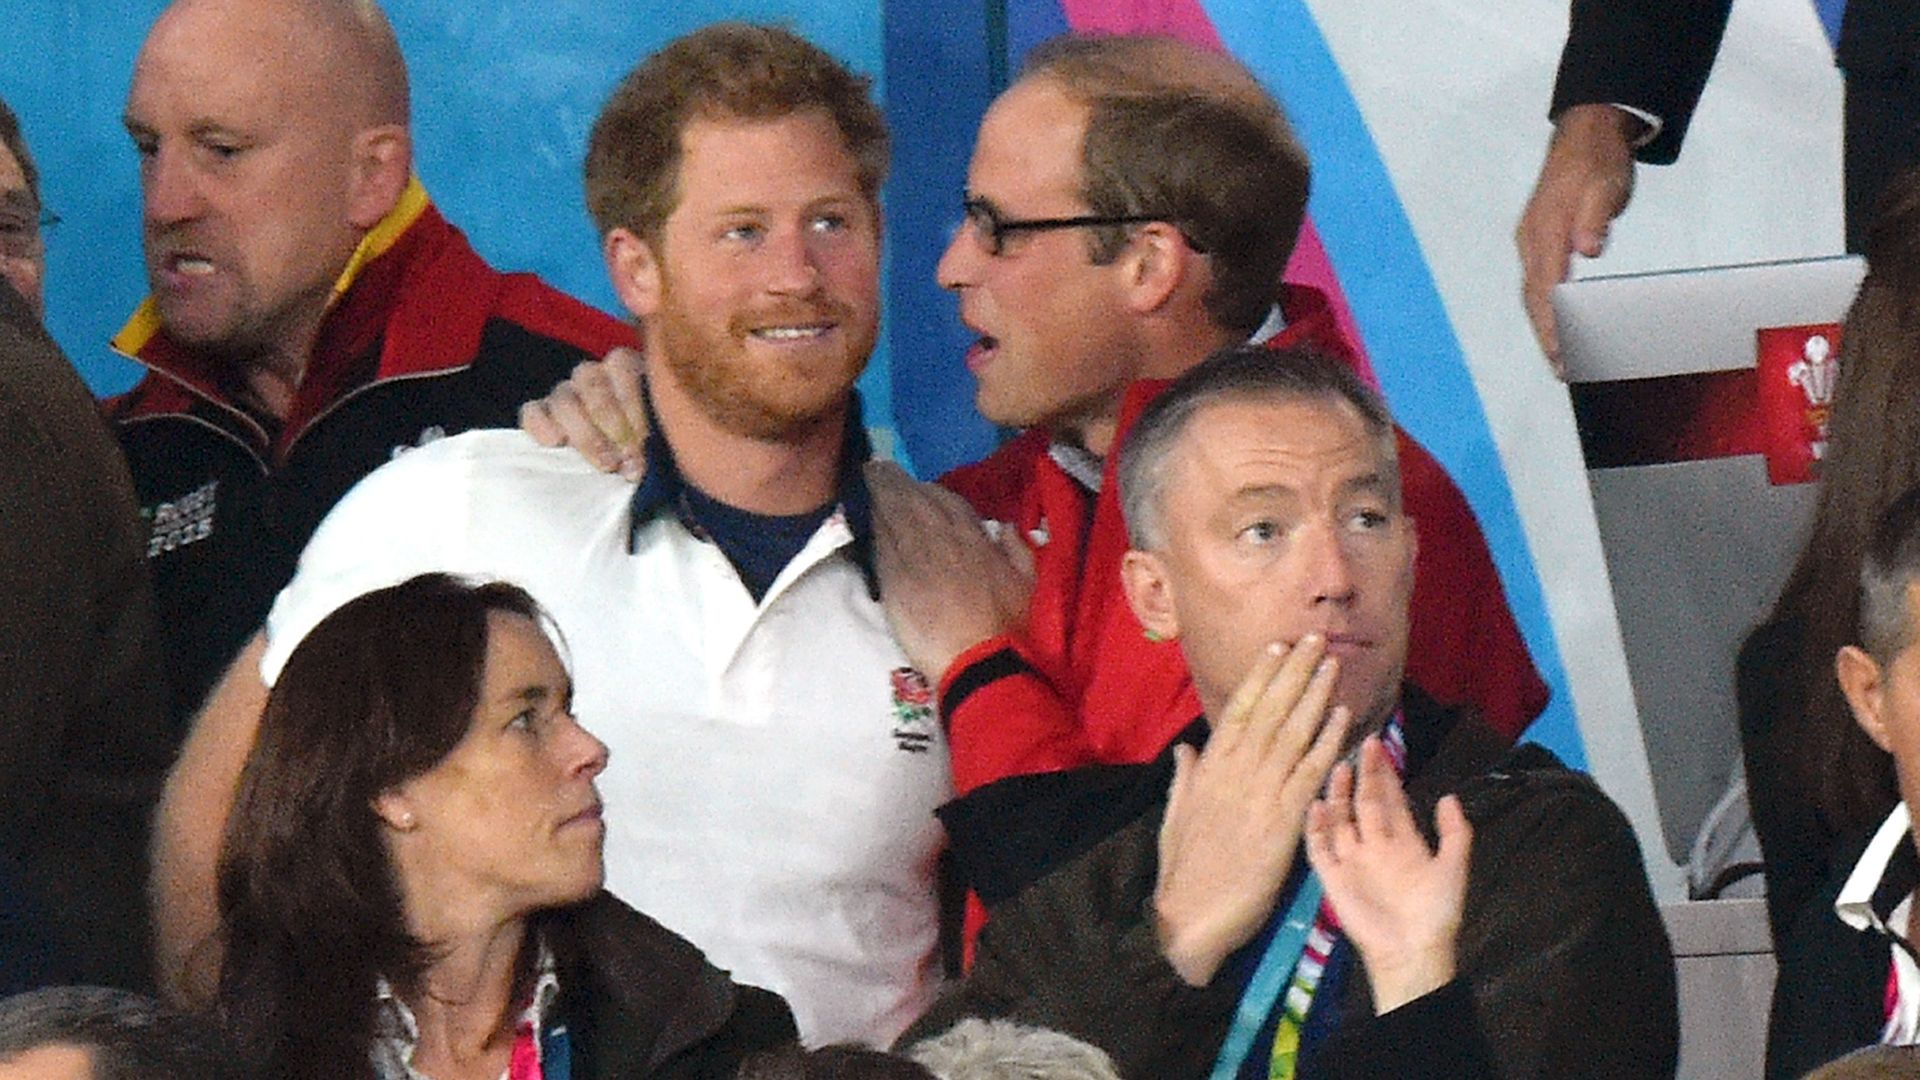 Prince William speaking into Prince Harry's ear